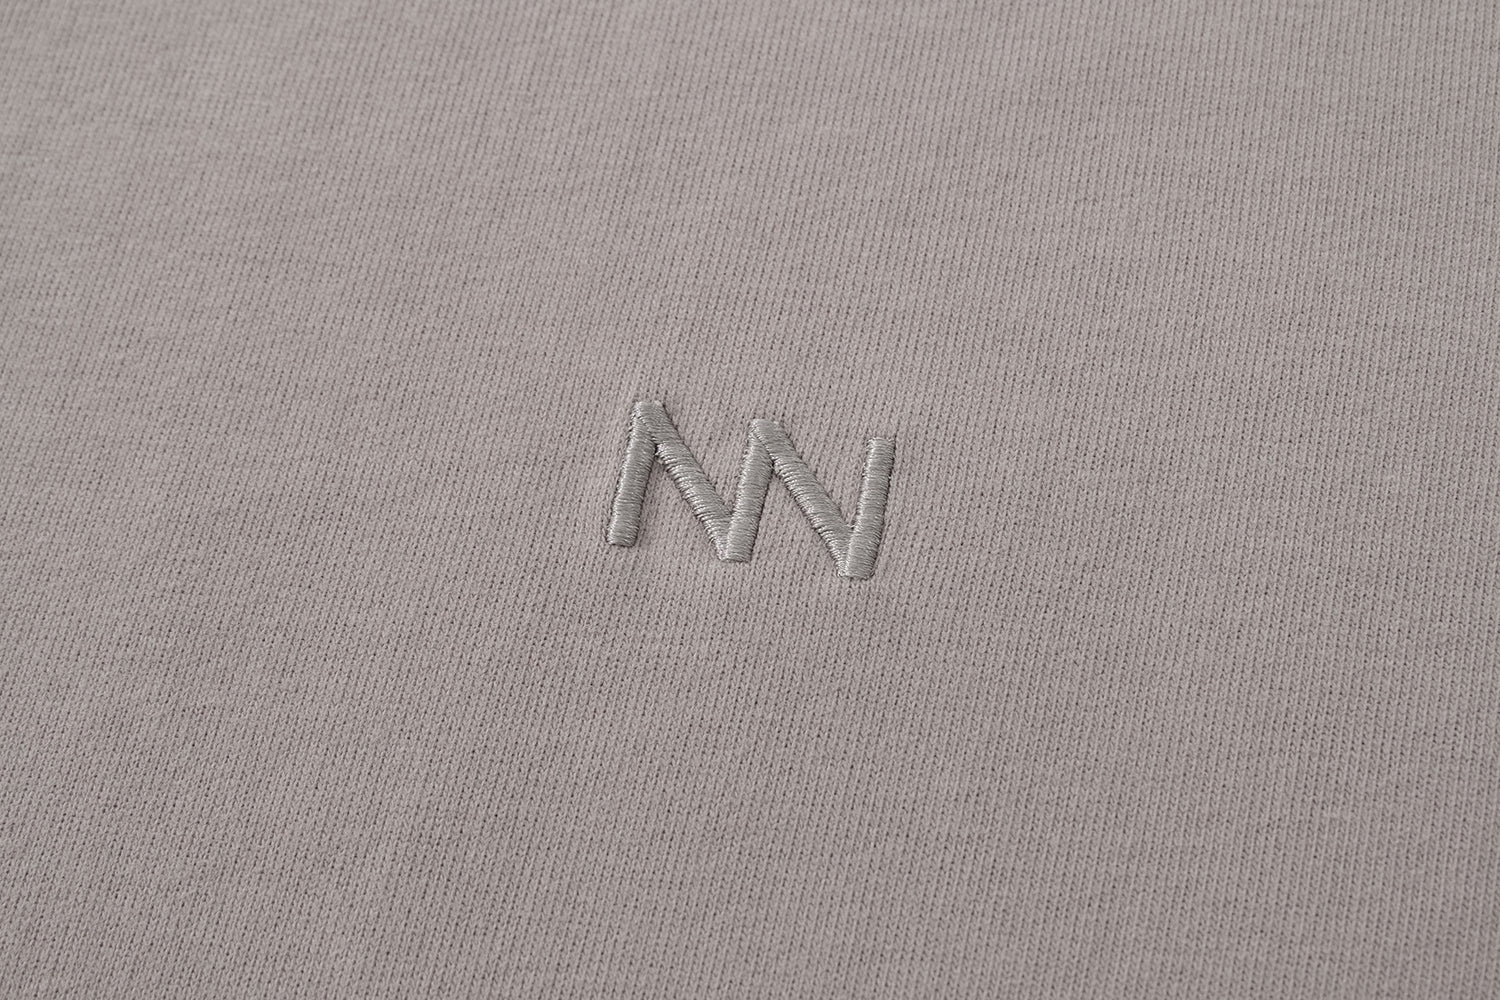 NW215LG | LAYER TEE | NOT WORKING V